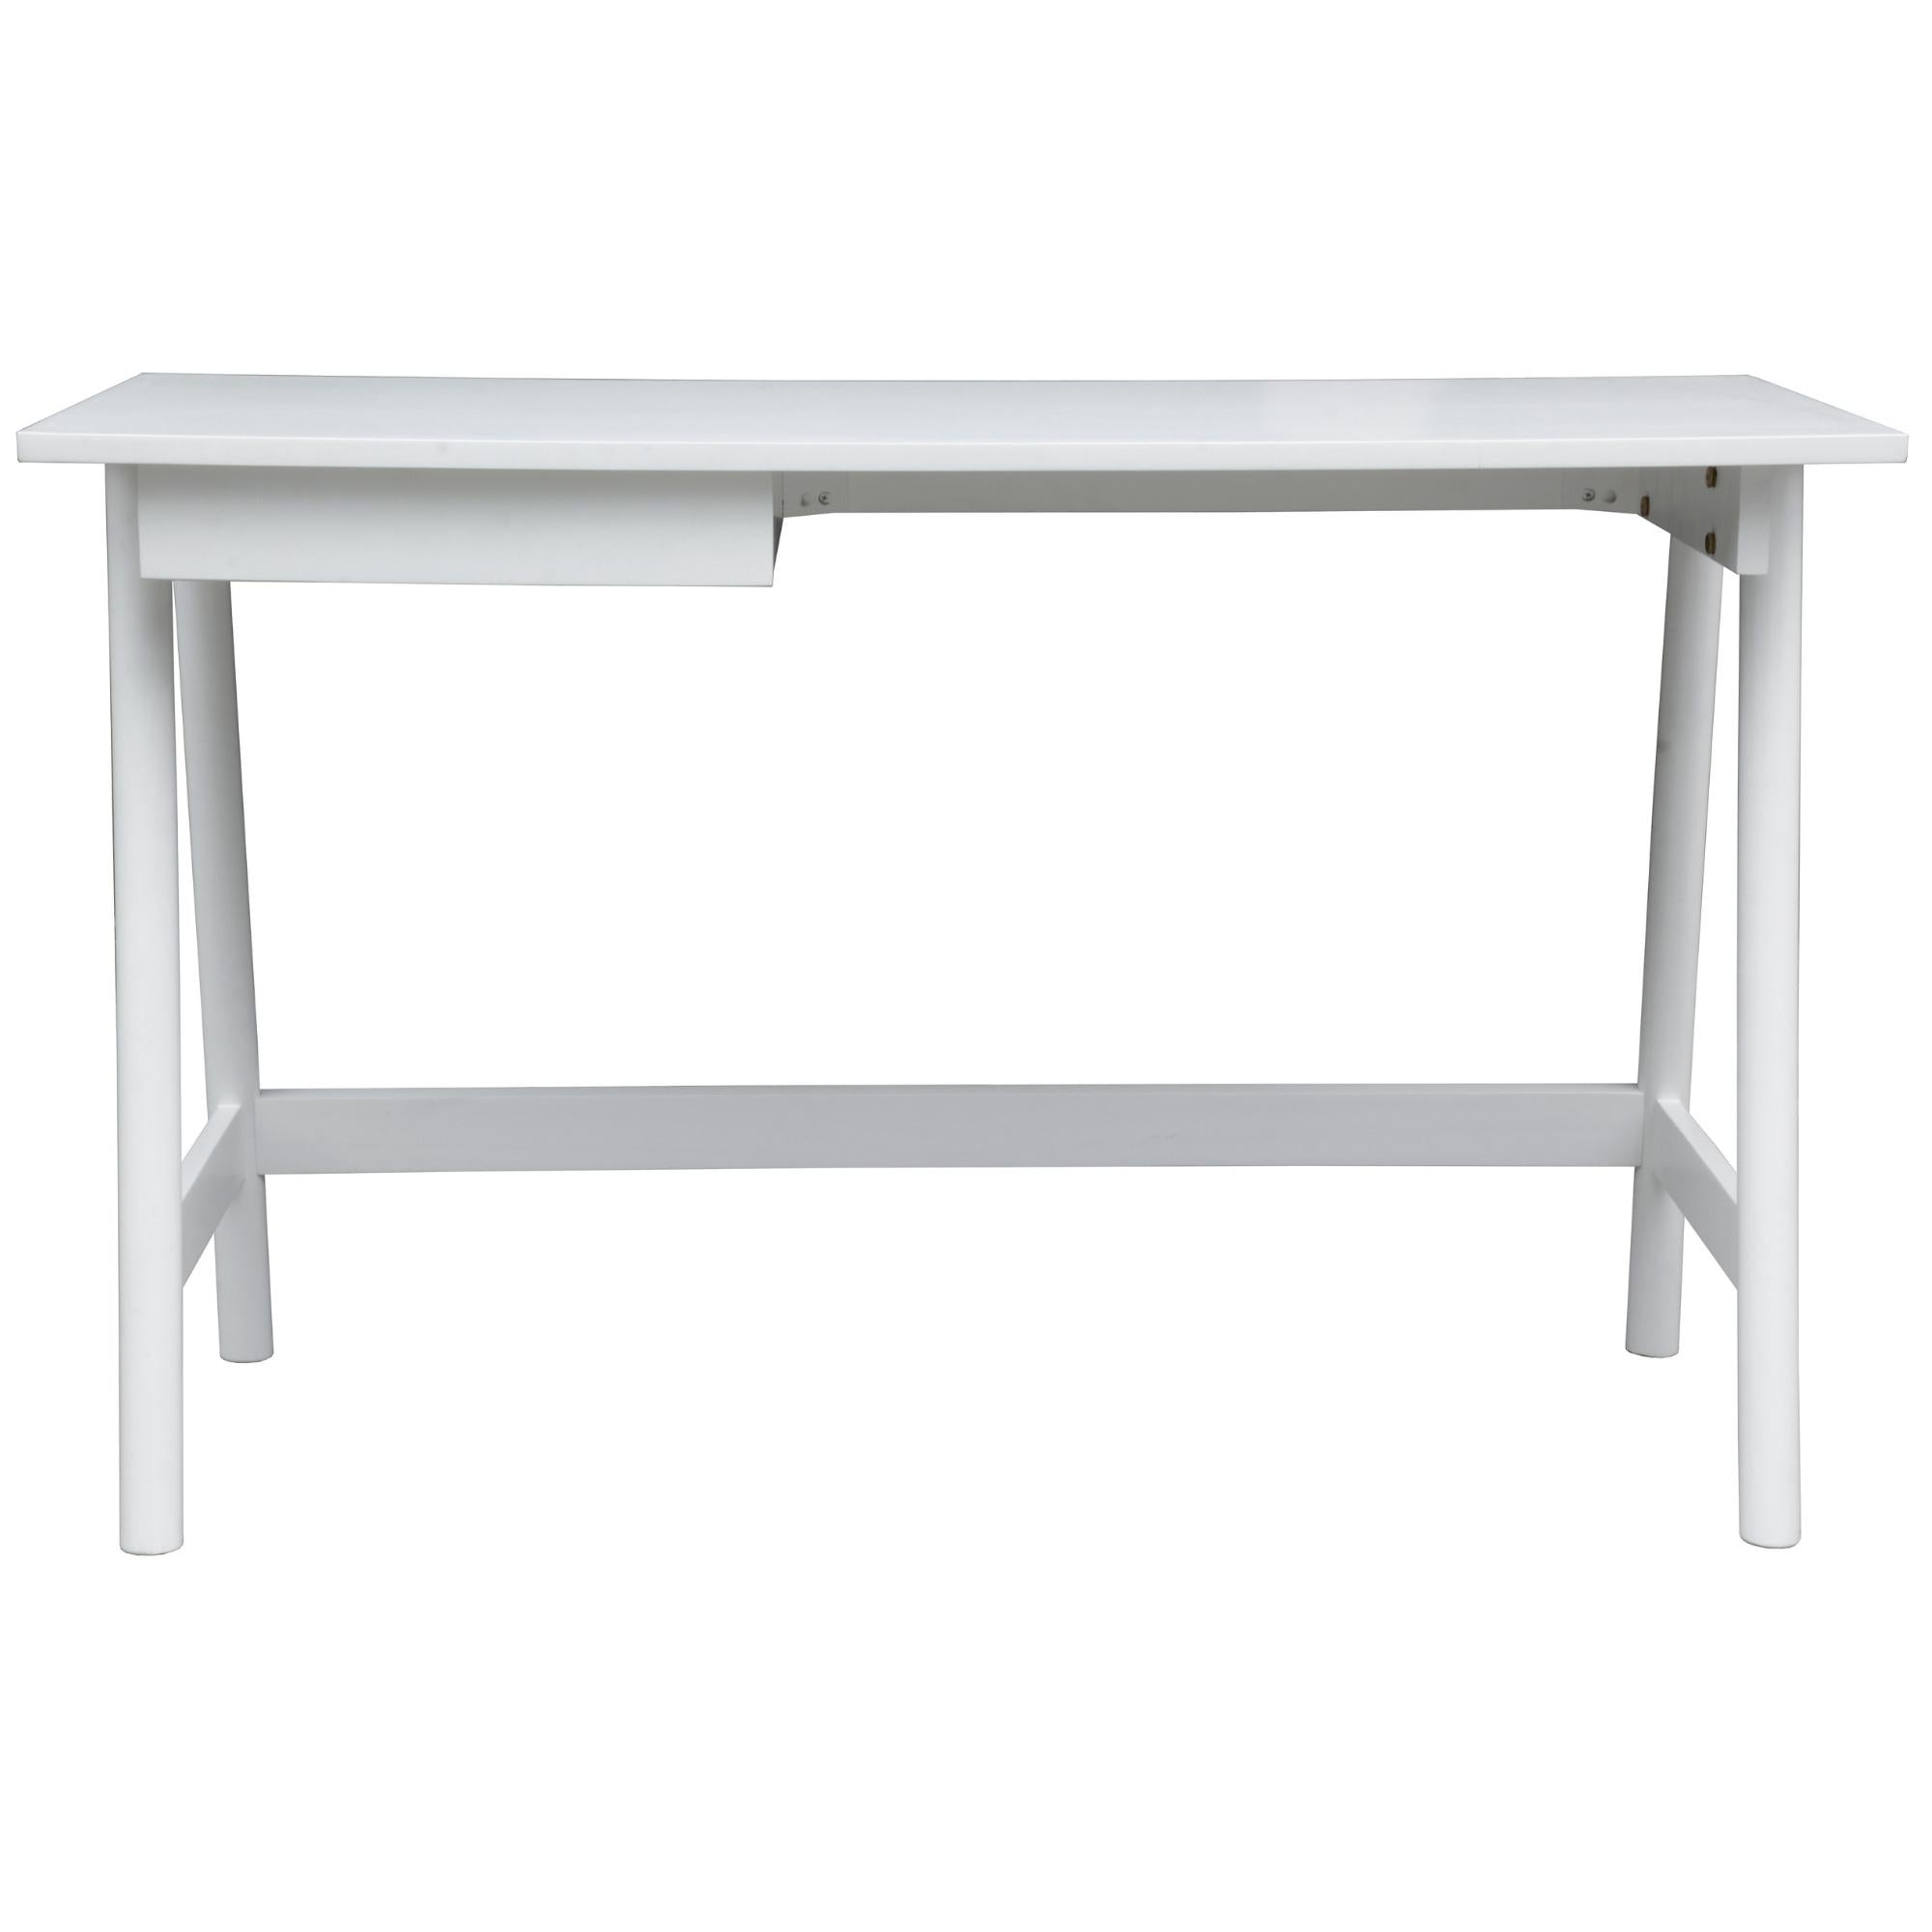 Office Desk Student Study Table Solid Wooden Timber Frame - White